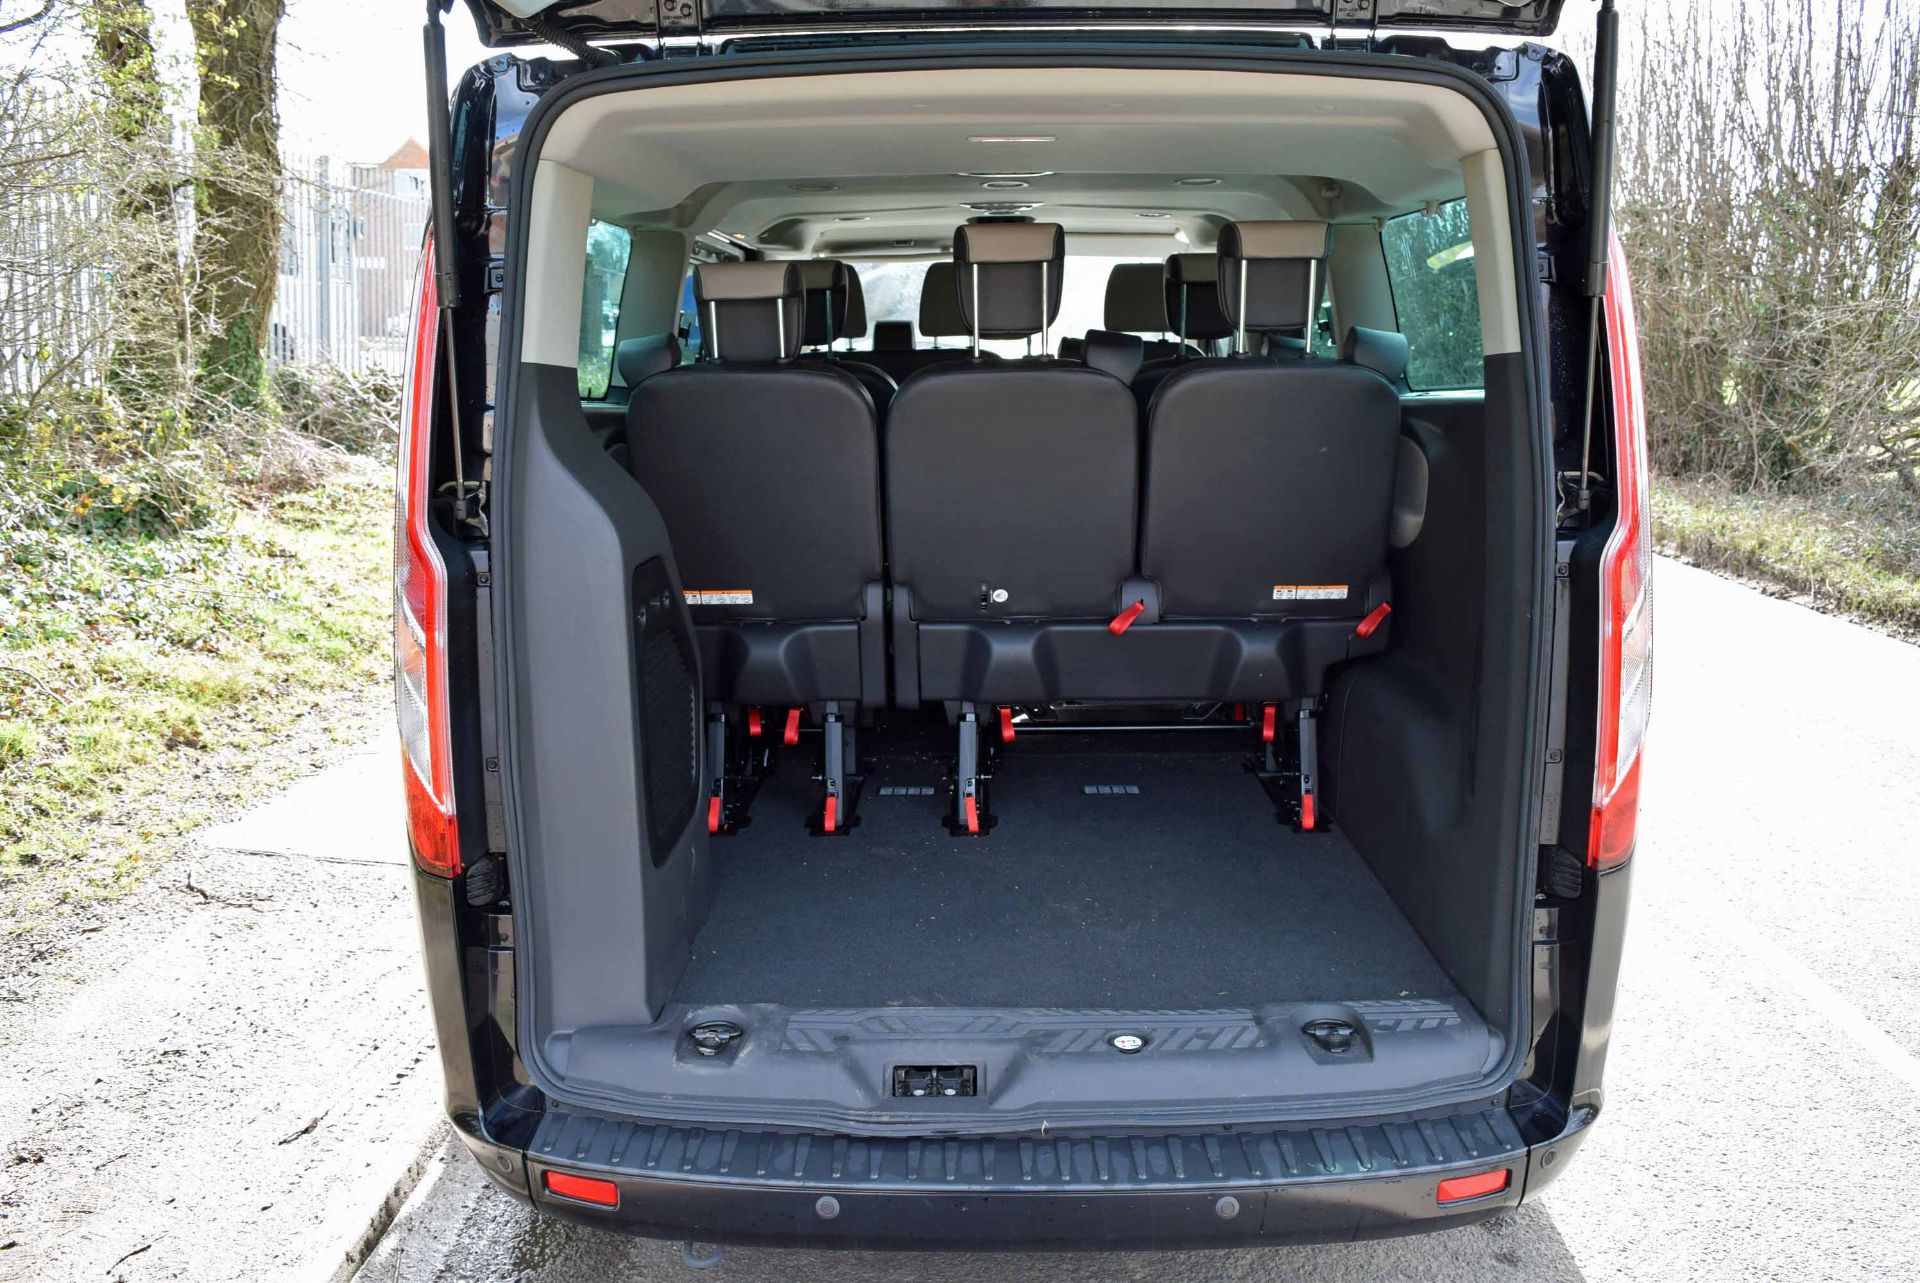 A 2015 FORD Transit Tourneo Custom 300 2.2 Diesel 6-Speed Limited E-Tech Manual MPV, Registration - Image 5 of 11